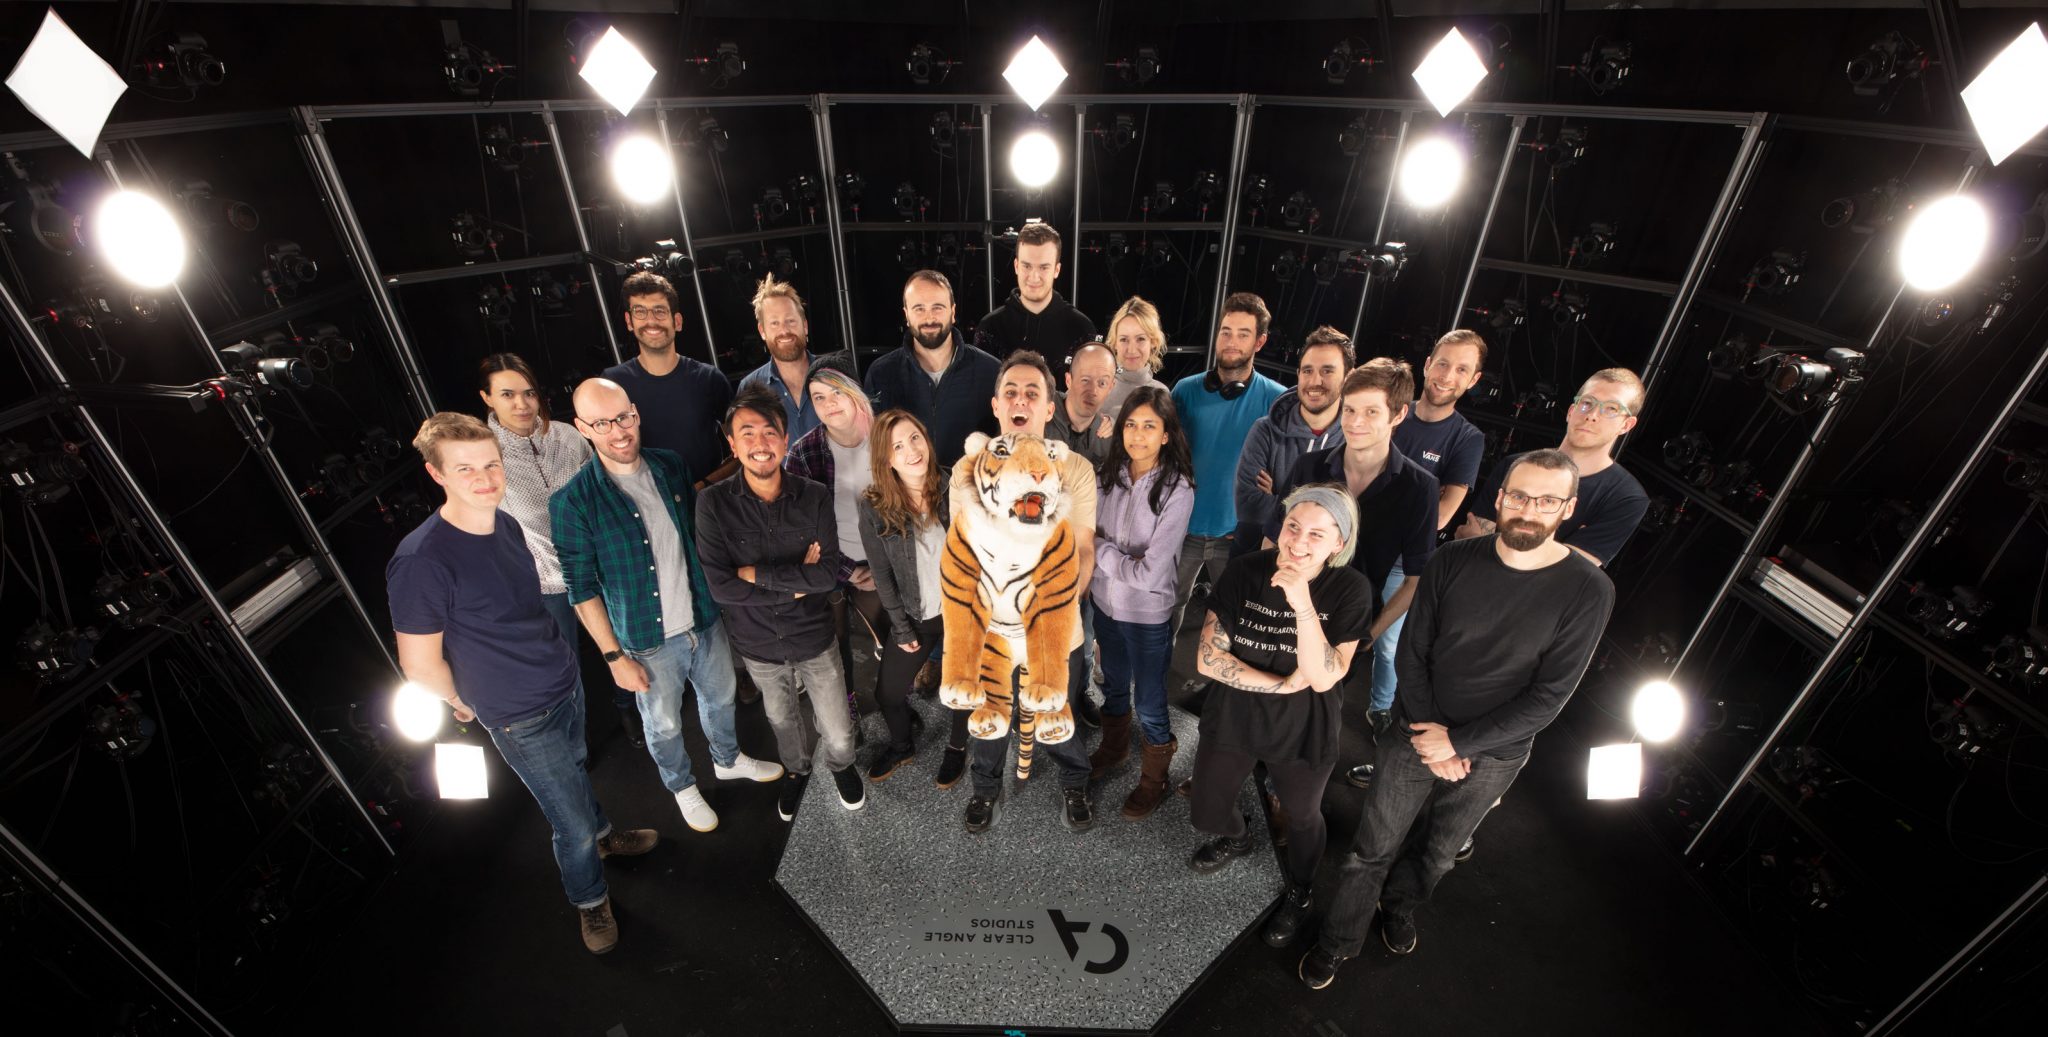 Clear Angle Studios 3D Scanning Crew Photo 2019